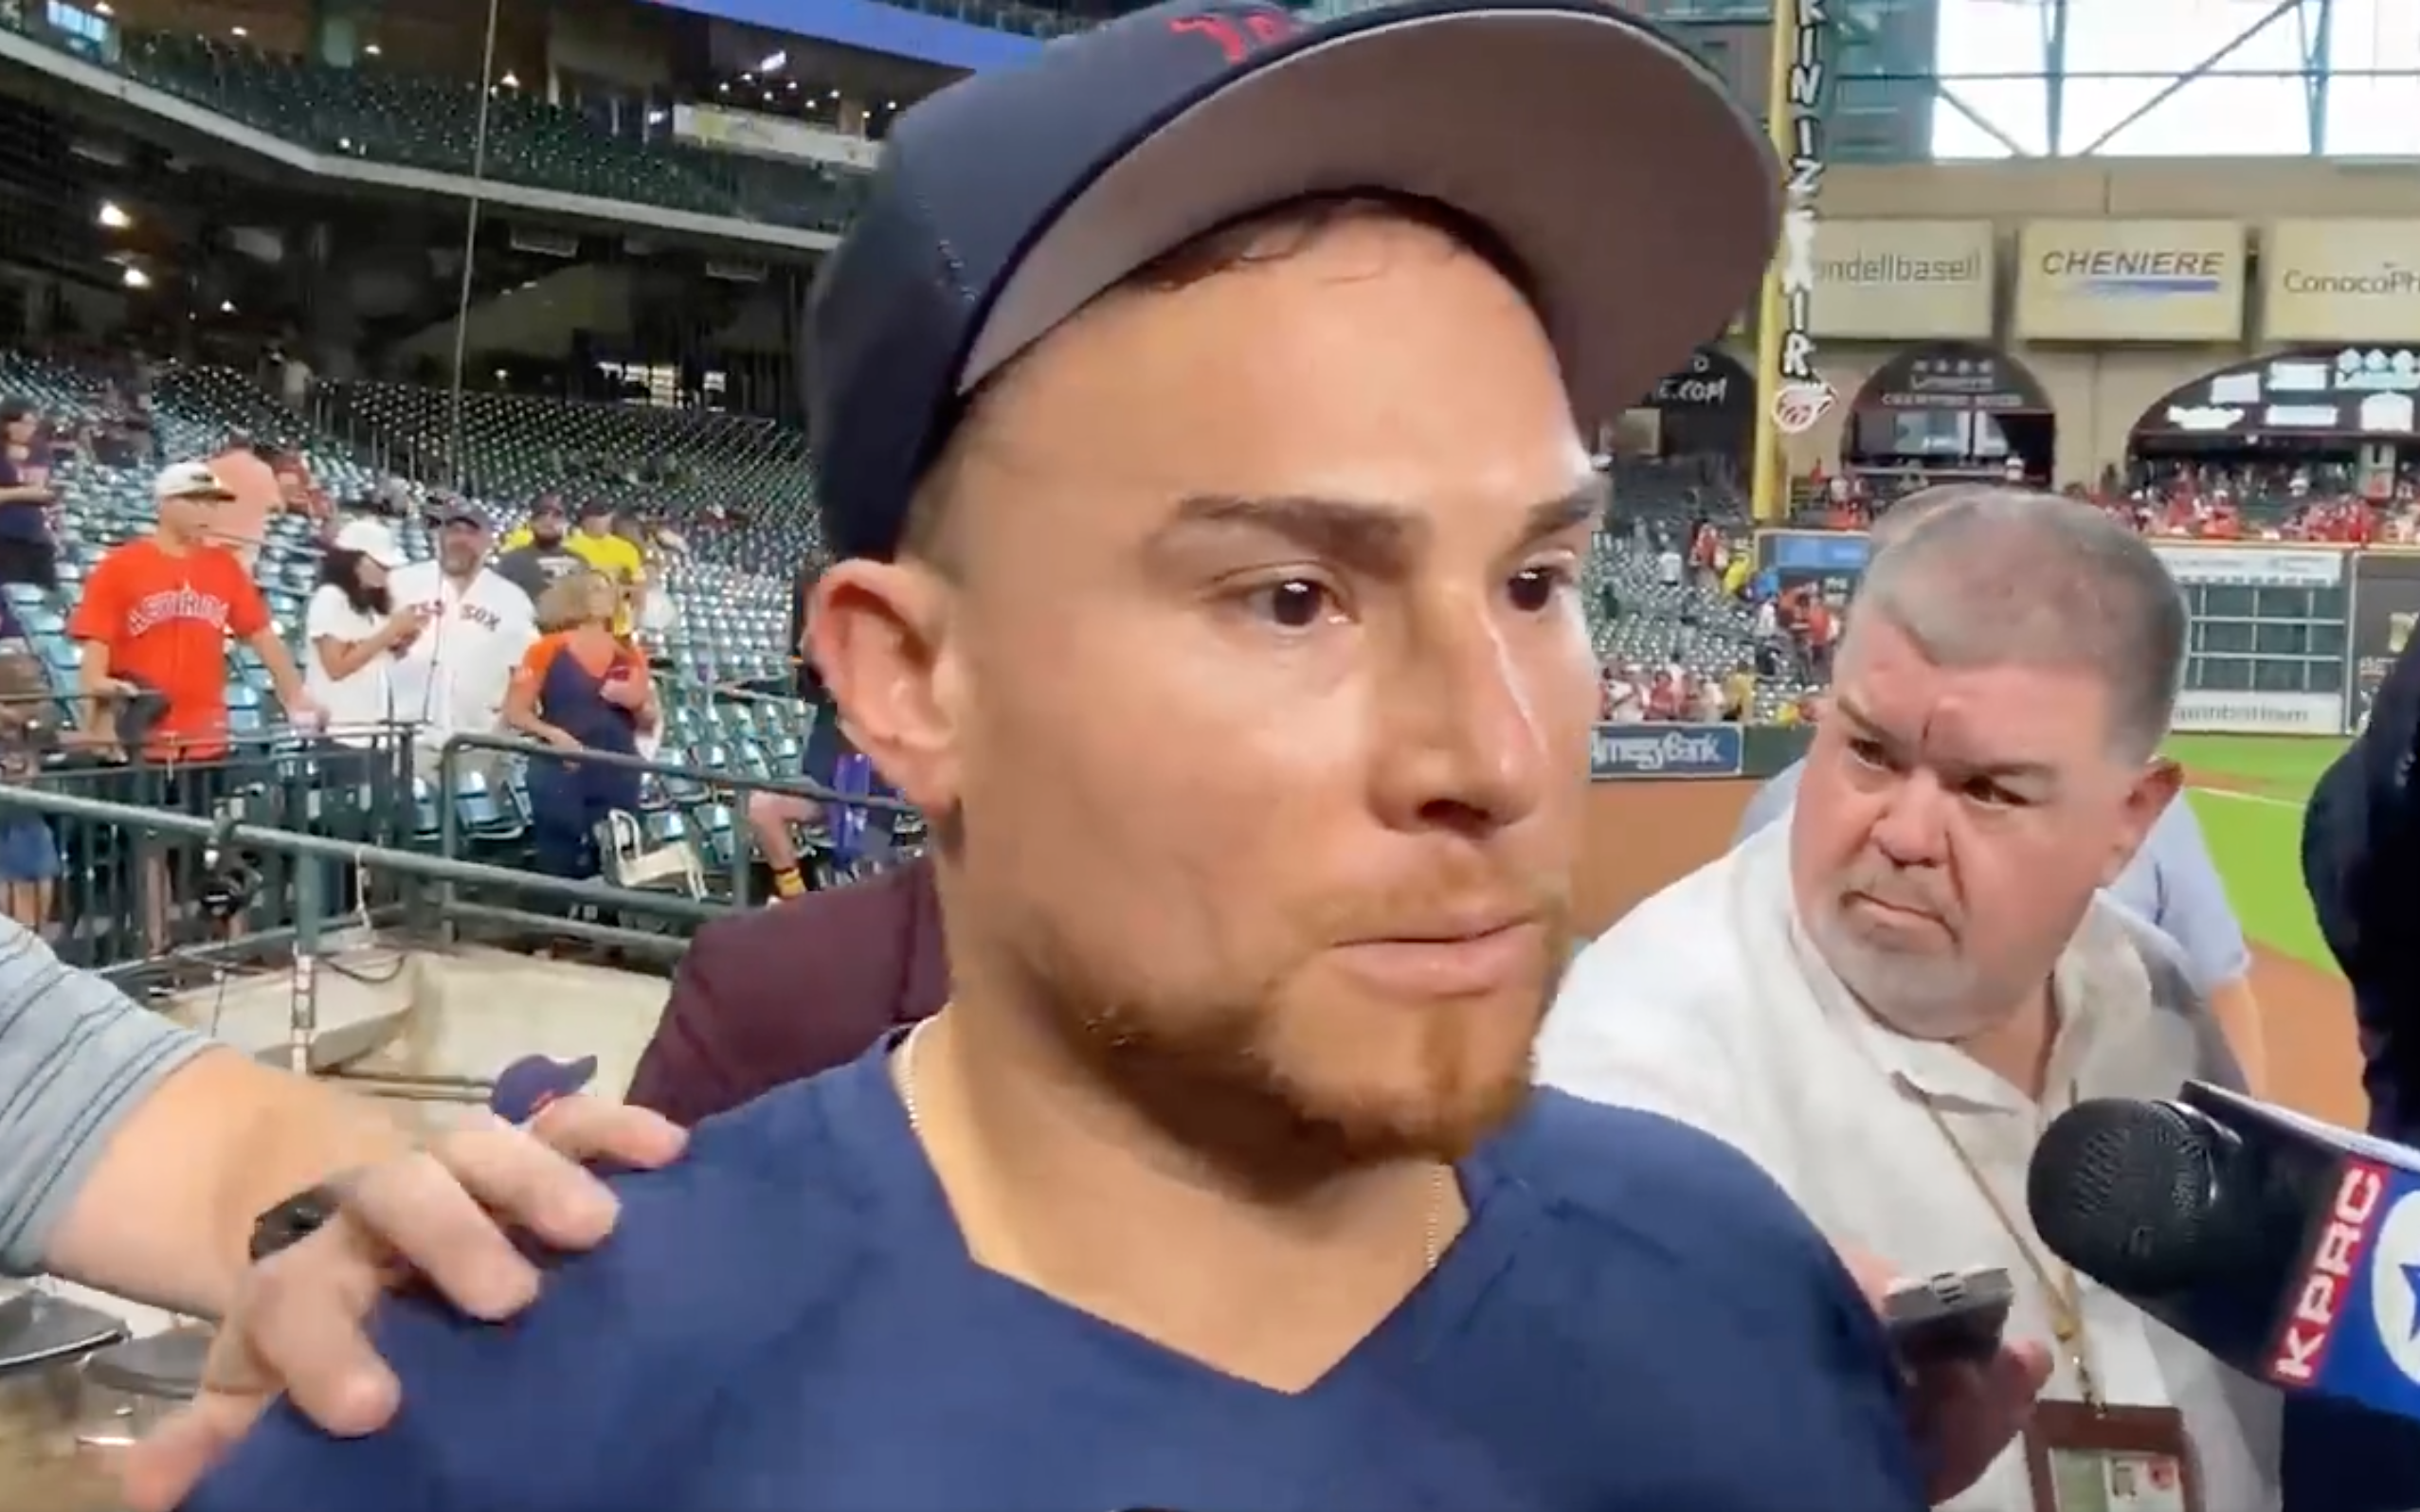 Christian Vazquez got traded to the Astros while playing the Astros at  Minute Maid Park and things got weird, This is the Loop